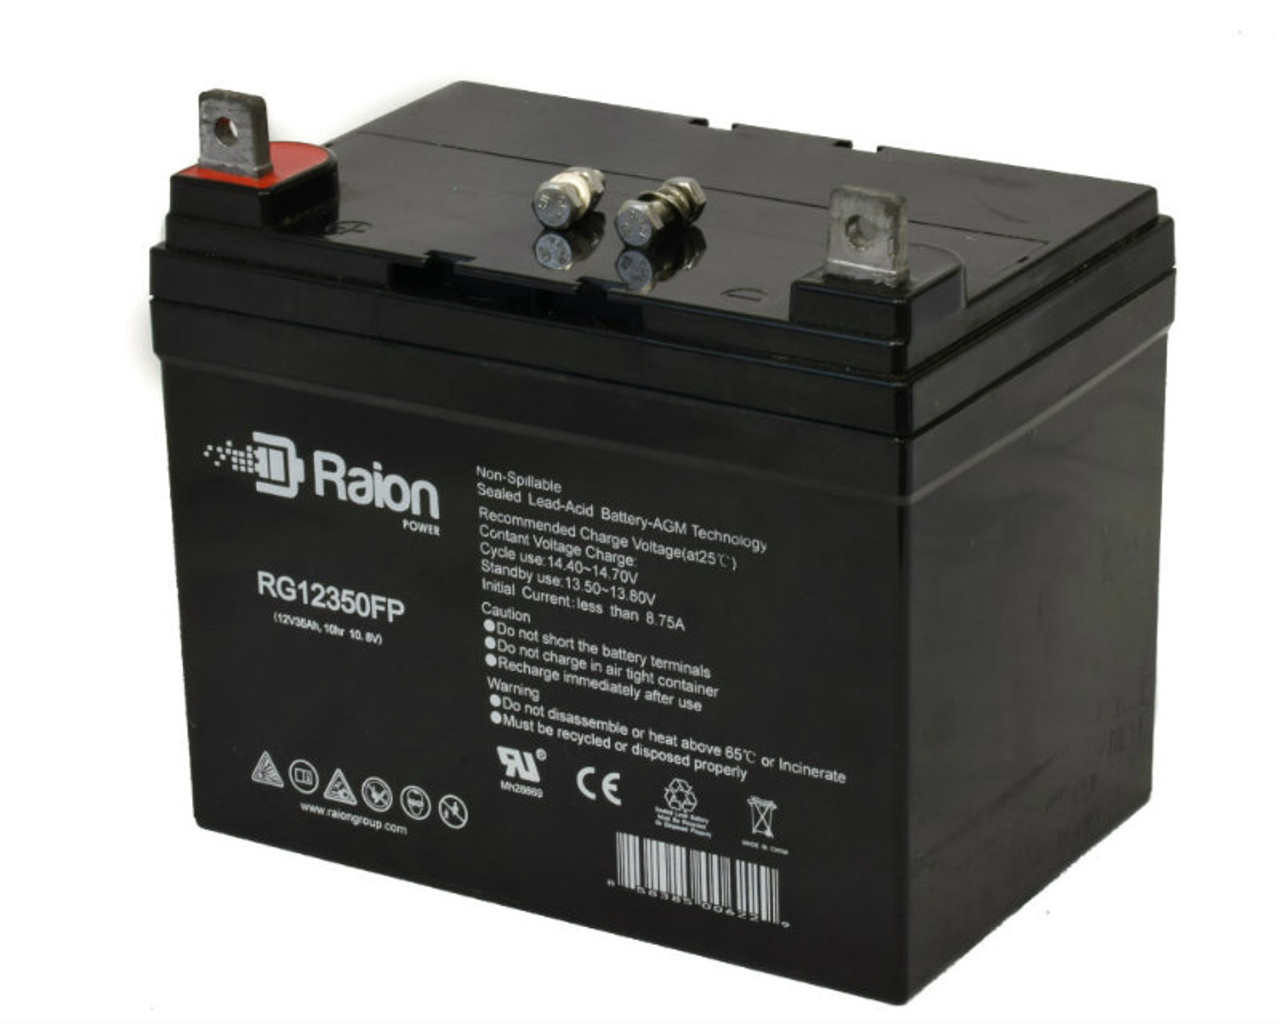 Raion Power Replacement 12V 35Ah RG12350FP Mobility Scooter Battery for Everest & Jennings 3N